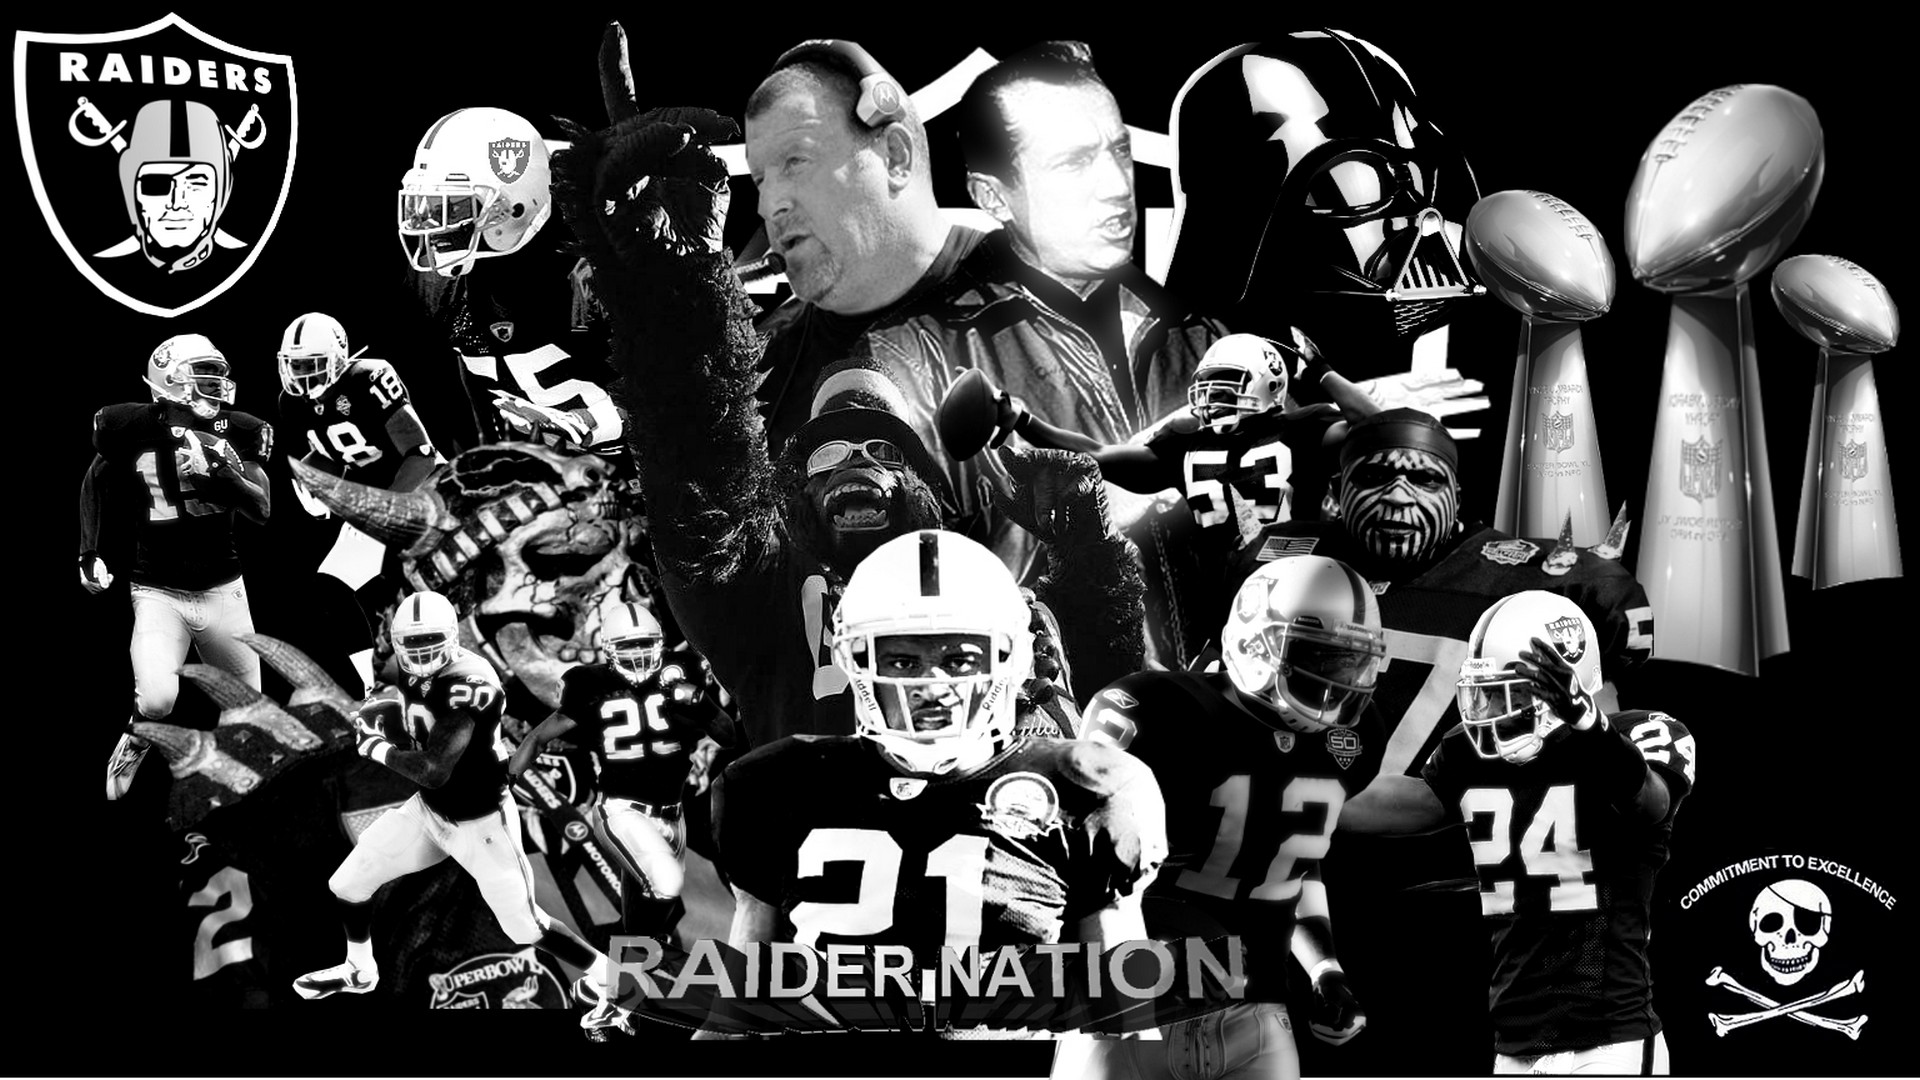 Best HD Oakland Raiders Wallpaper with high-resolution 1920x1080 pixel. Download and set as wallpaper for Desktop Computer, Apple iPhone X, XS Max, XR, 8, 7, 6, SE, iPad, Android